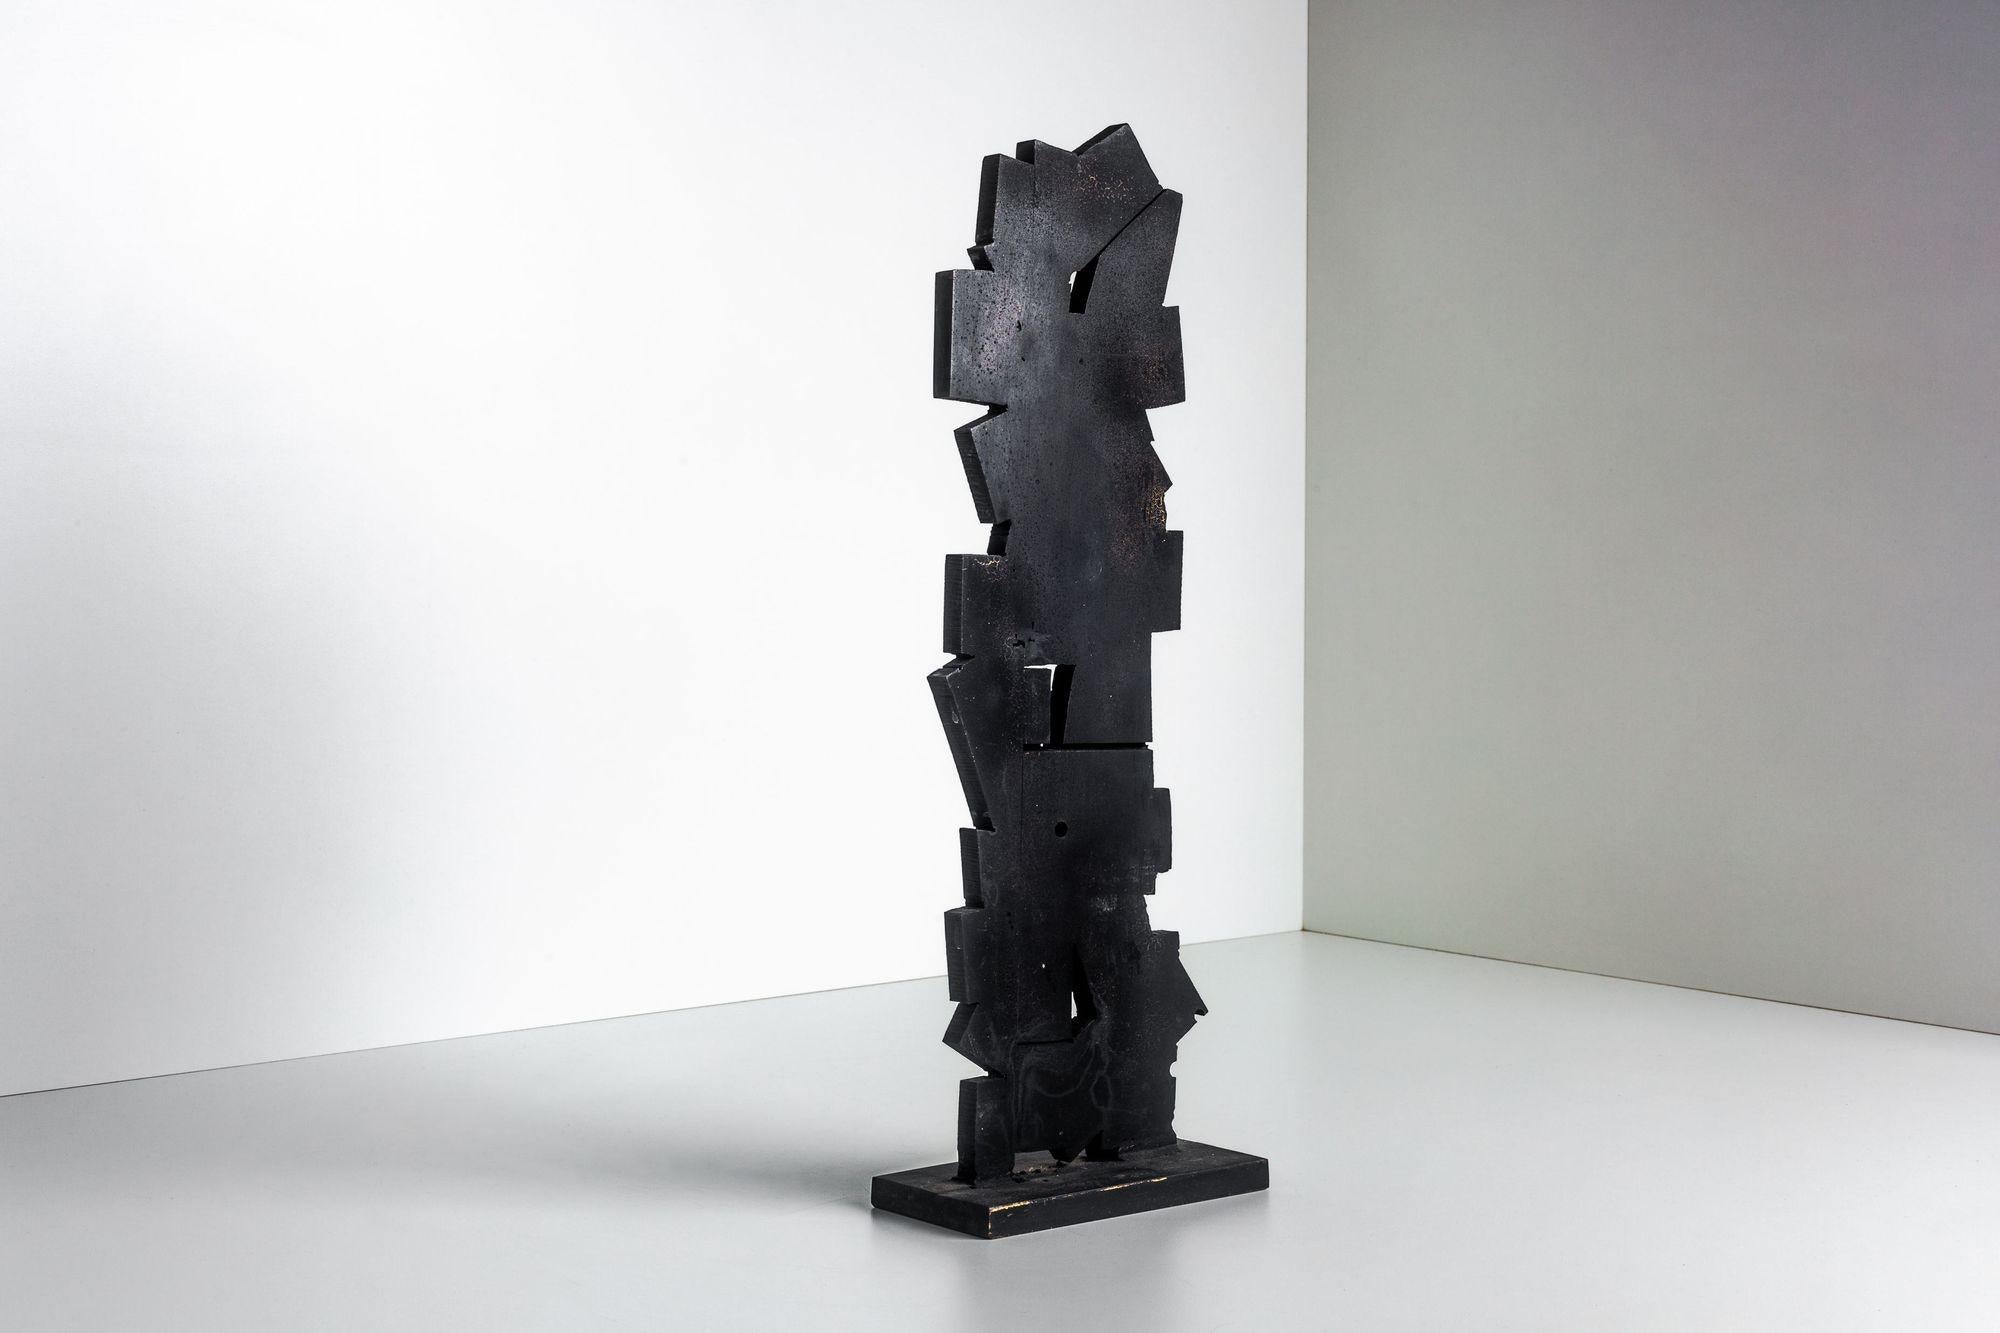 Tony Rosenthal Tabletop Bronze Sculpture

Untitled. Vertically oriented black painted bronze sculpture with three interior voids with irregular edges welded to base, signed, circa 1998.

From The Estate Collection of Tony Rosenthal.

This piece